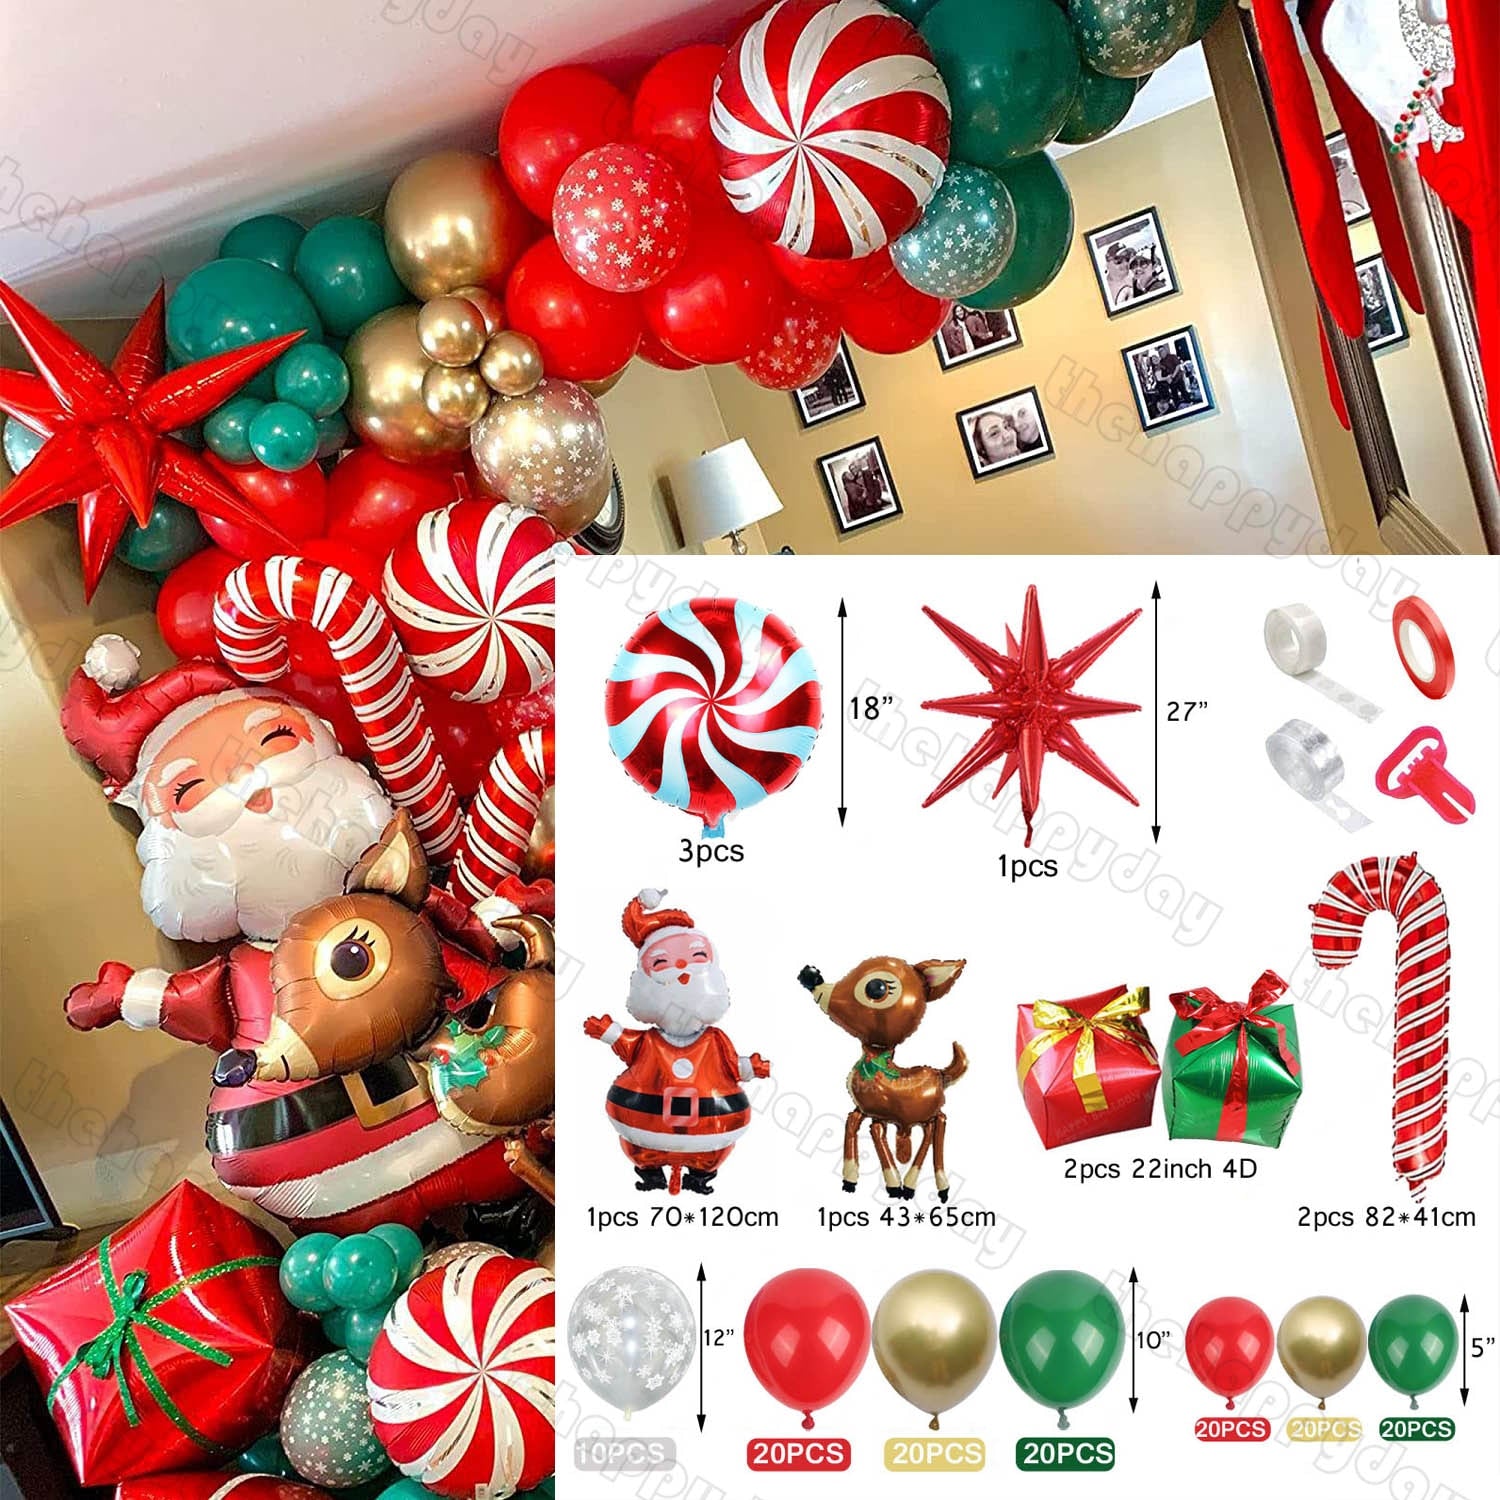 Christmas Balloon Arch Green Gold Red Box Candy Balloons Garland Cone Explosion Star Foil Balloons New Year Christma Party Decor Christmas Balloons DailyAlertDeals V 144pcs Christmas Other 